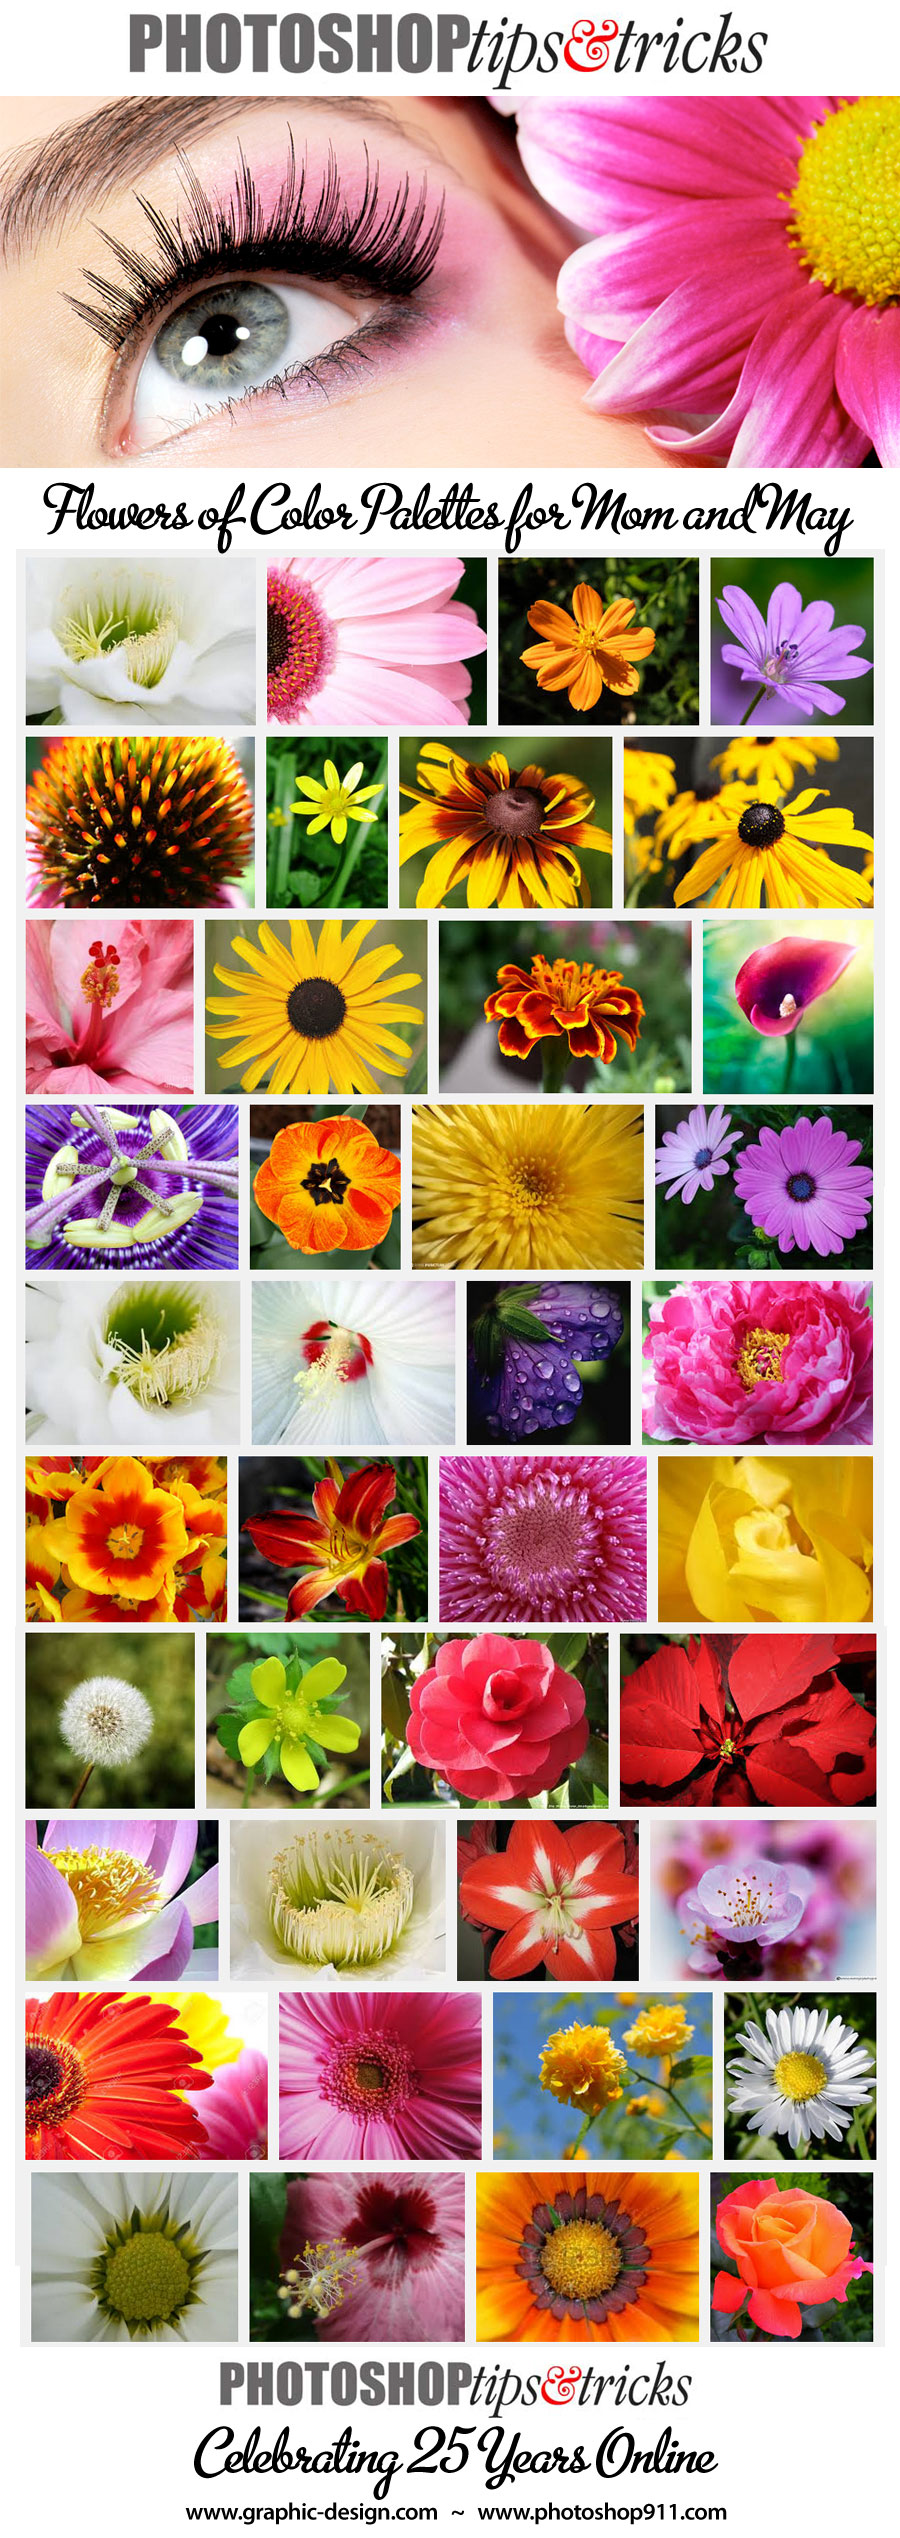 may_flowers_color_palettes